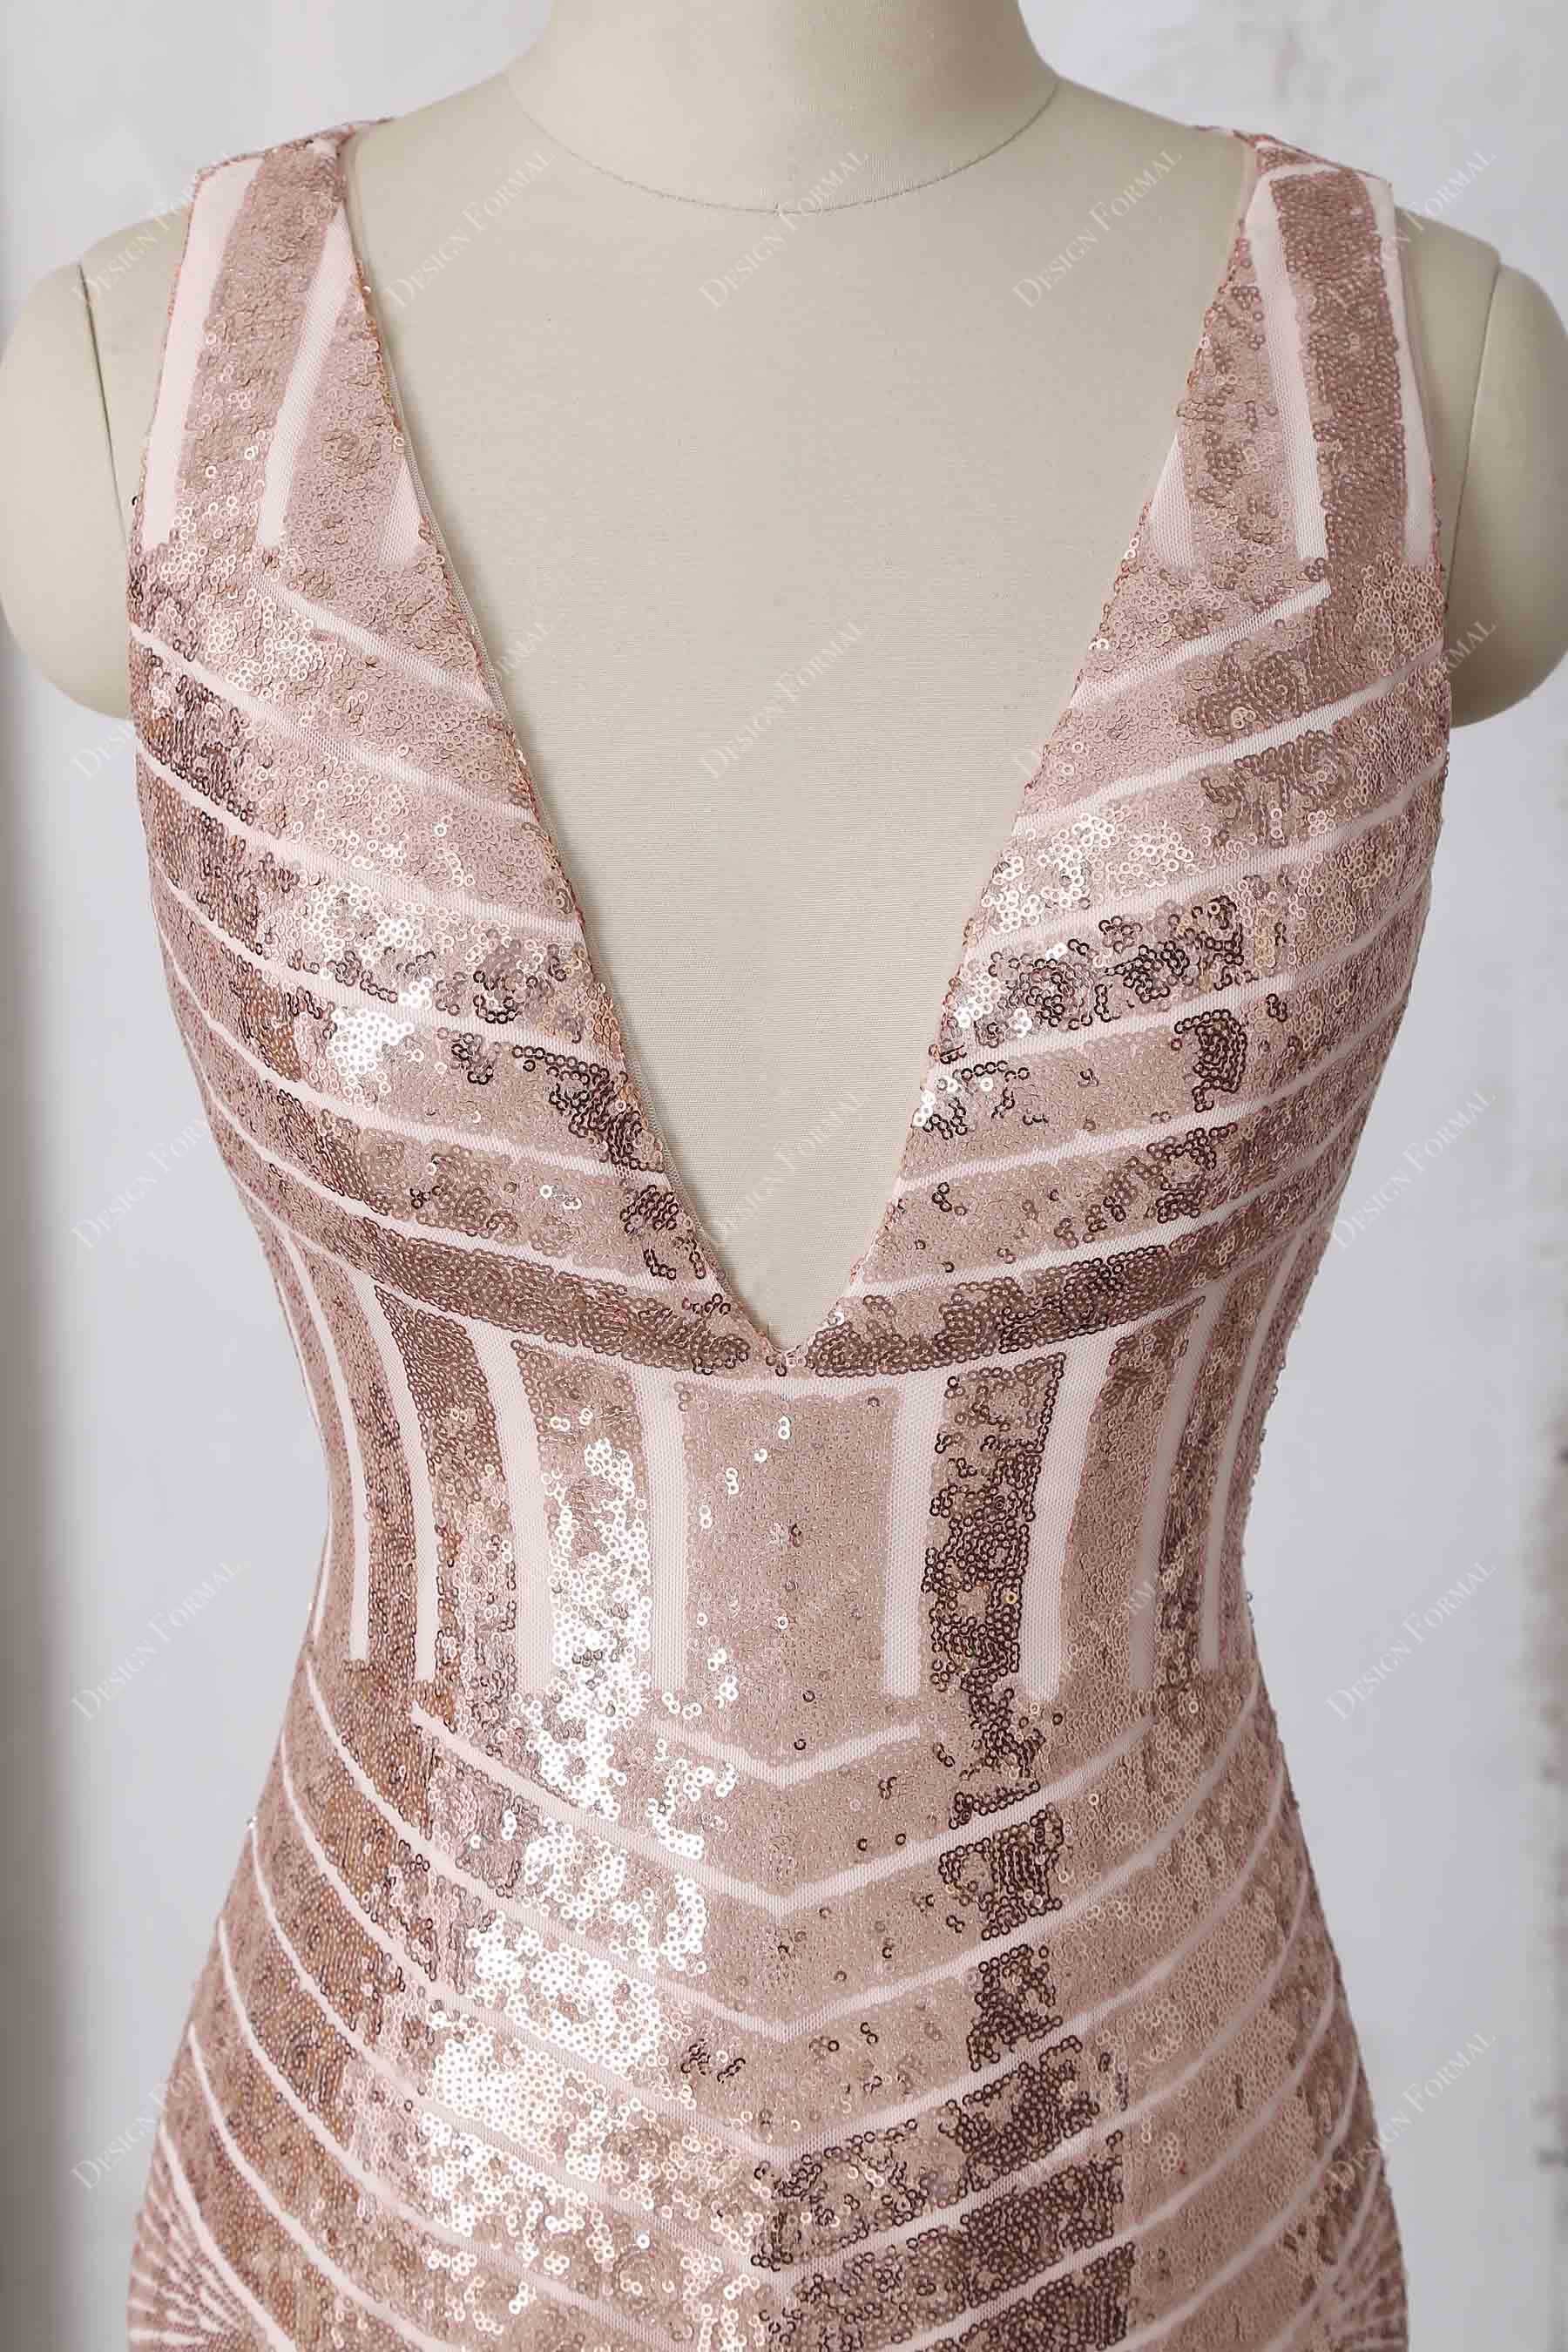 rose gold patterned sequin bodice with plunging neck